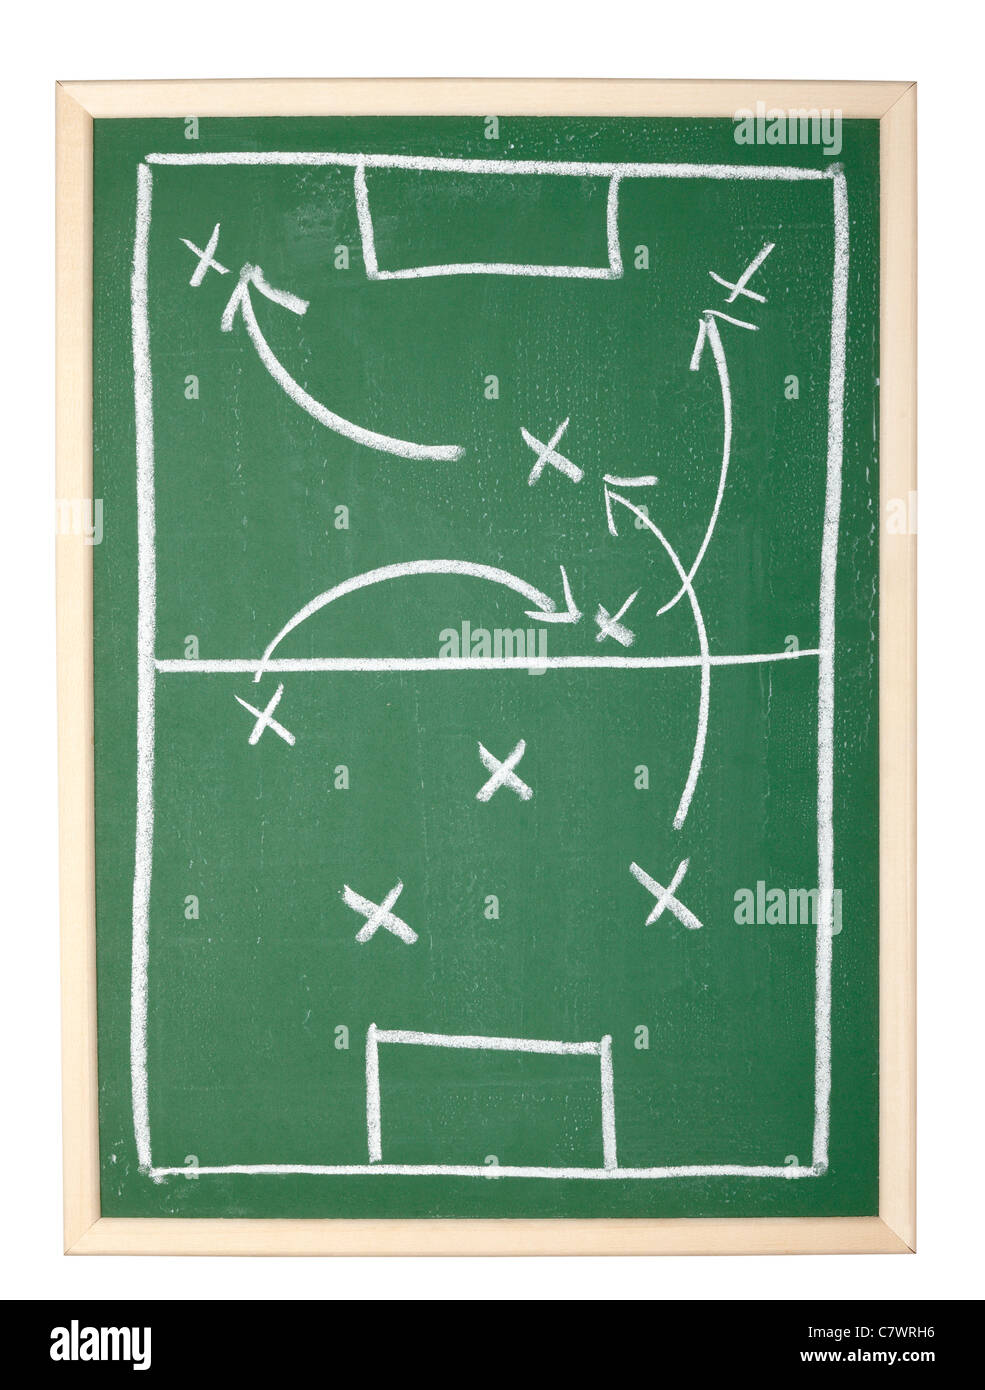 soccer game drawing on a blackboard Stock Photo